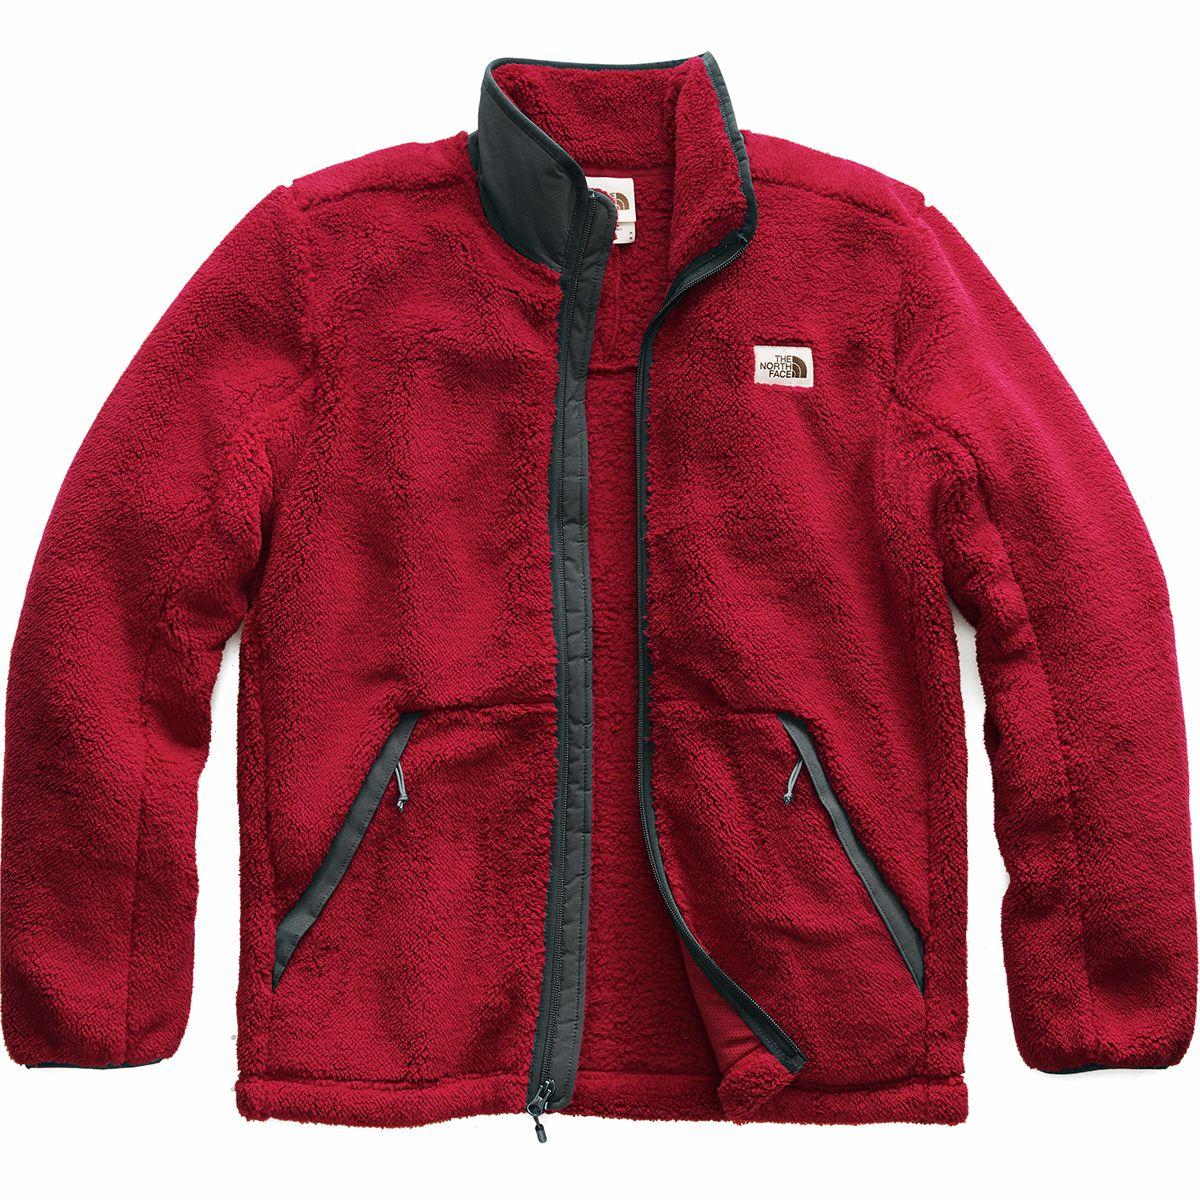 The North Face Campshire Full-zip Fleece Jacket in Red for Men - Lyst